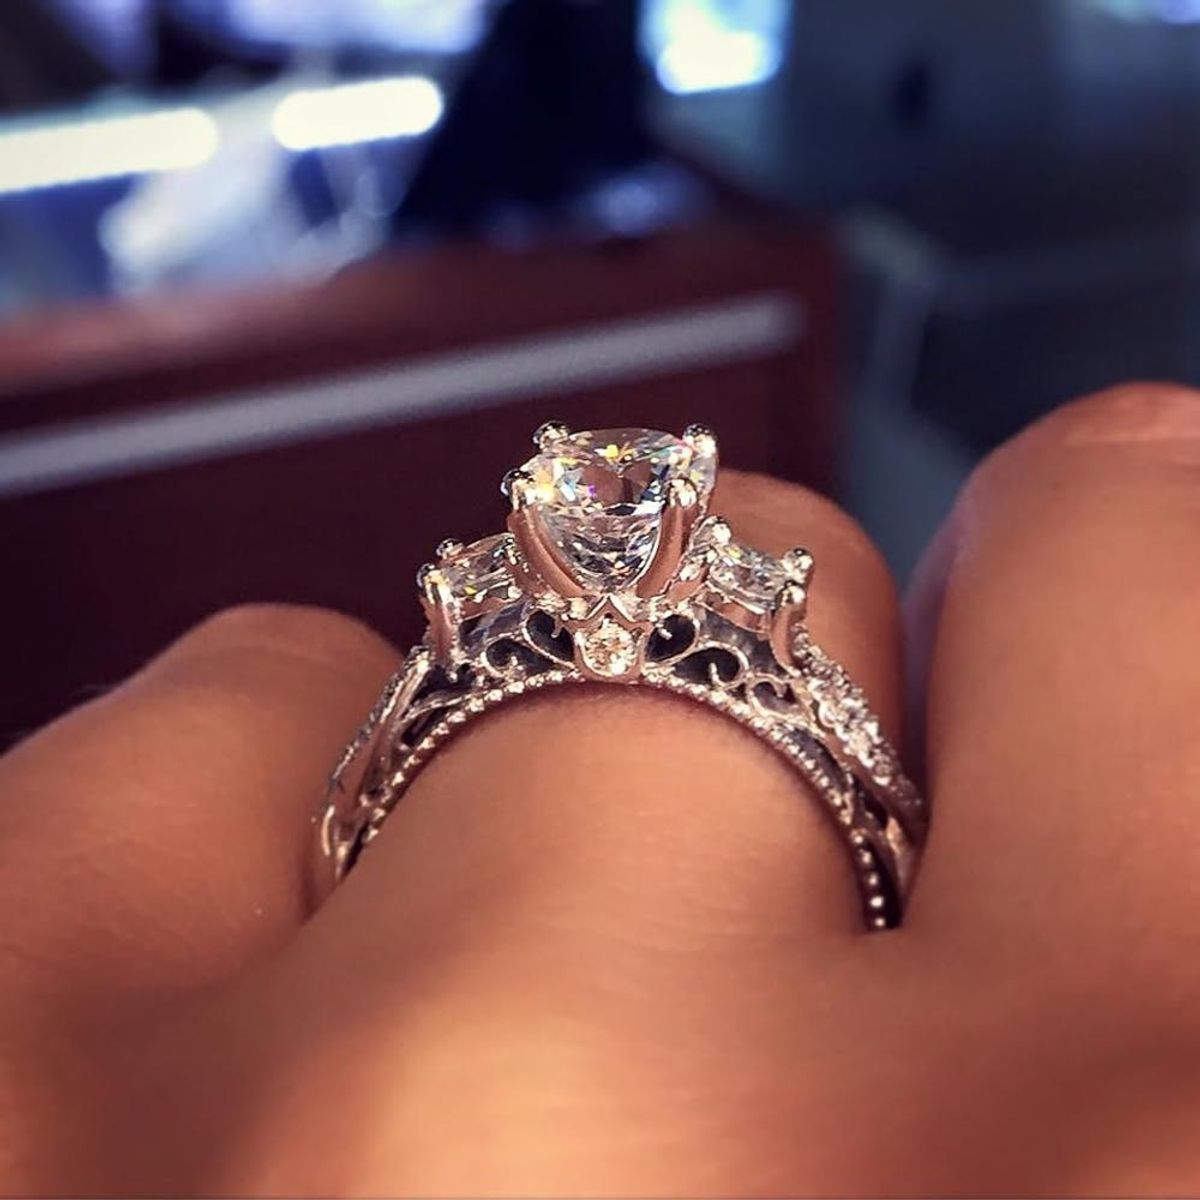 This Is the Most Popular Engagement Ring, According to Pinterest